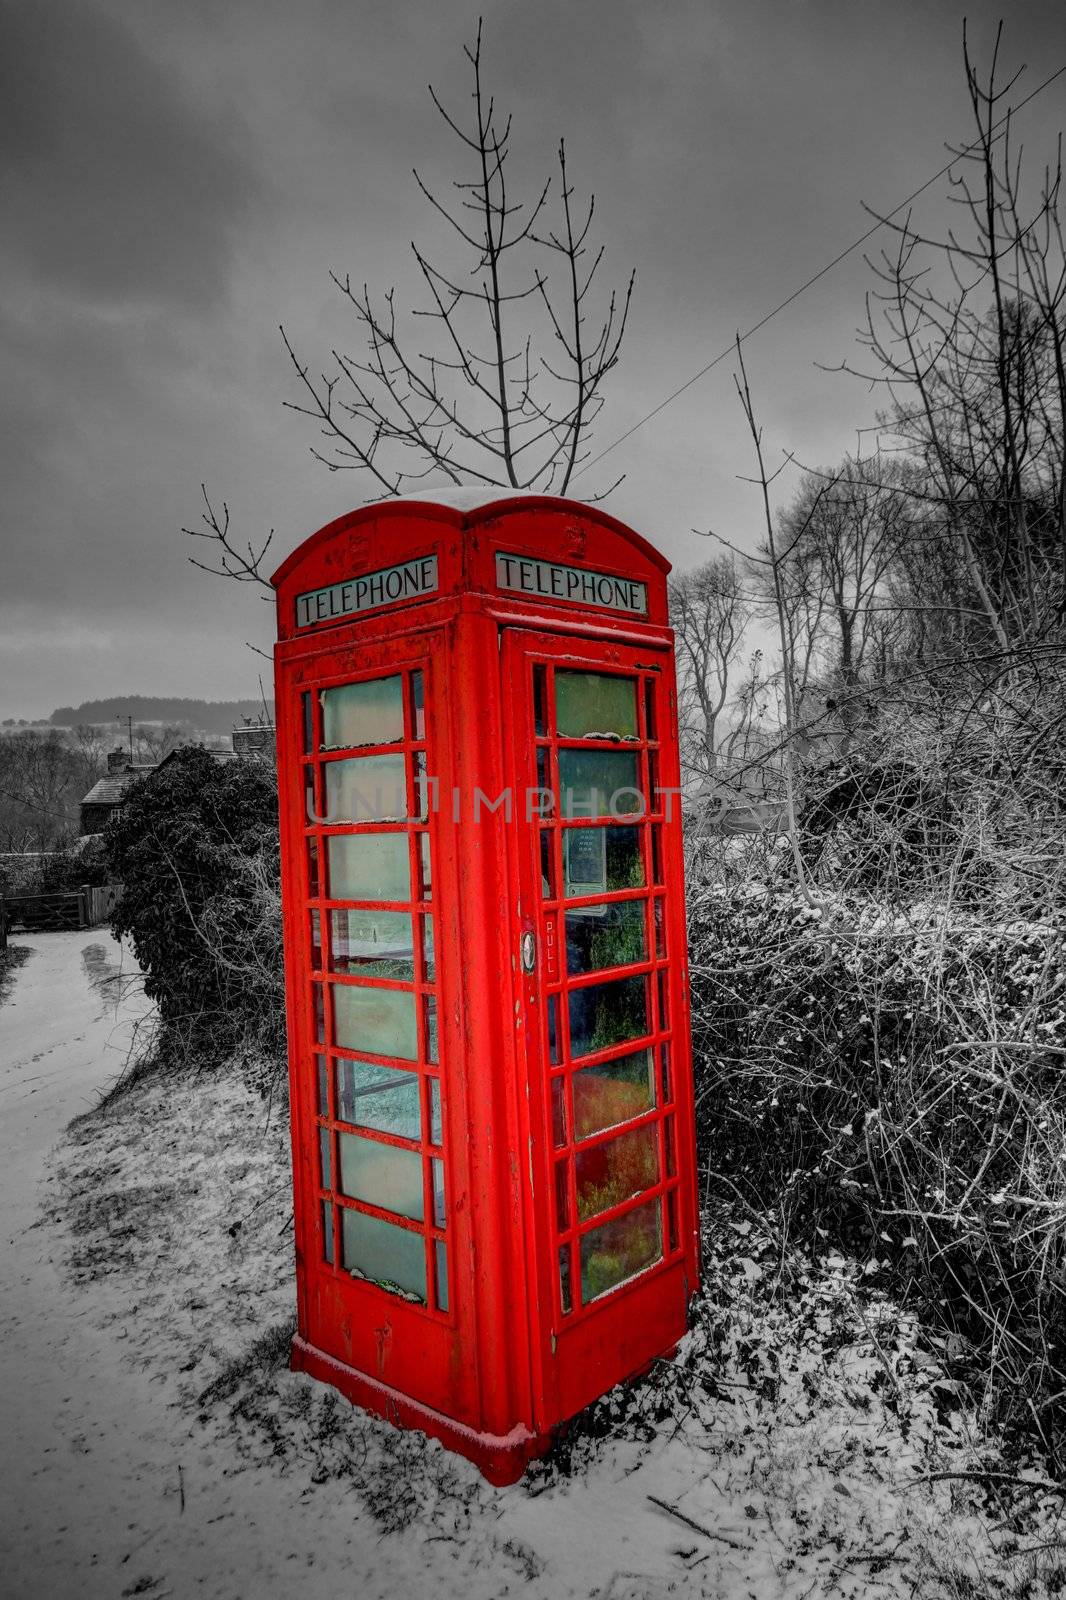 Snowey phone box in the Breacon Beacons by olliemt